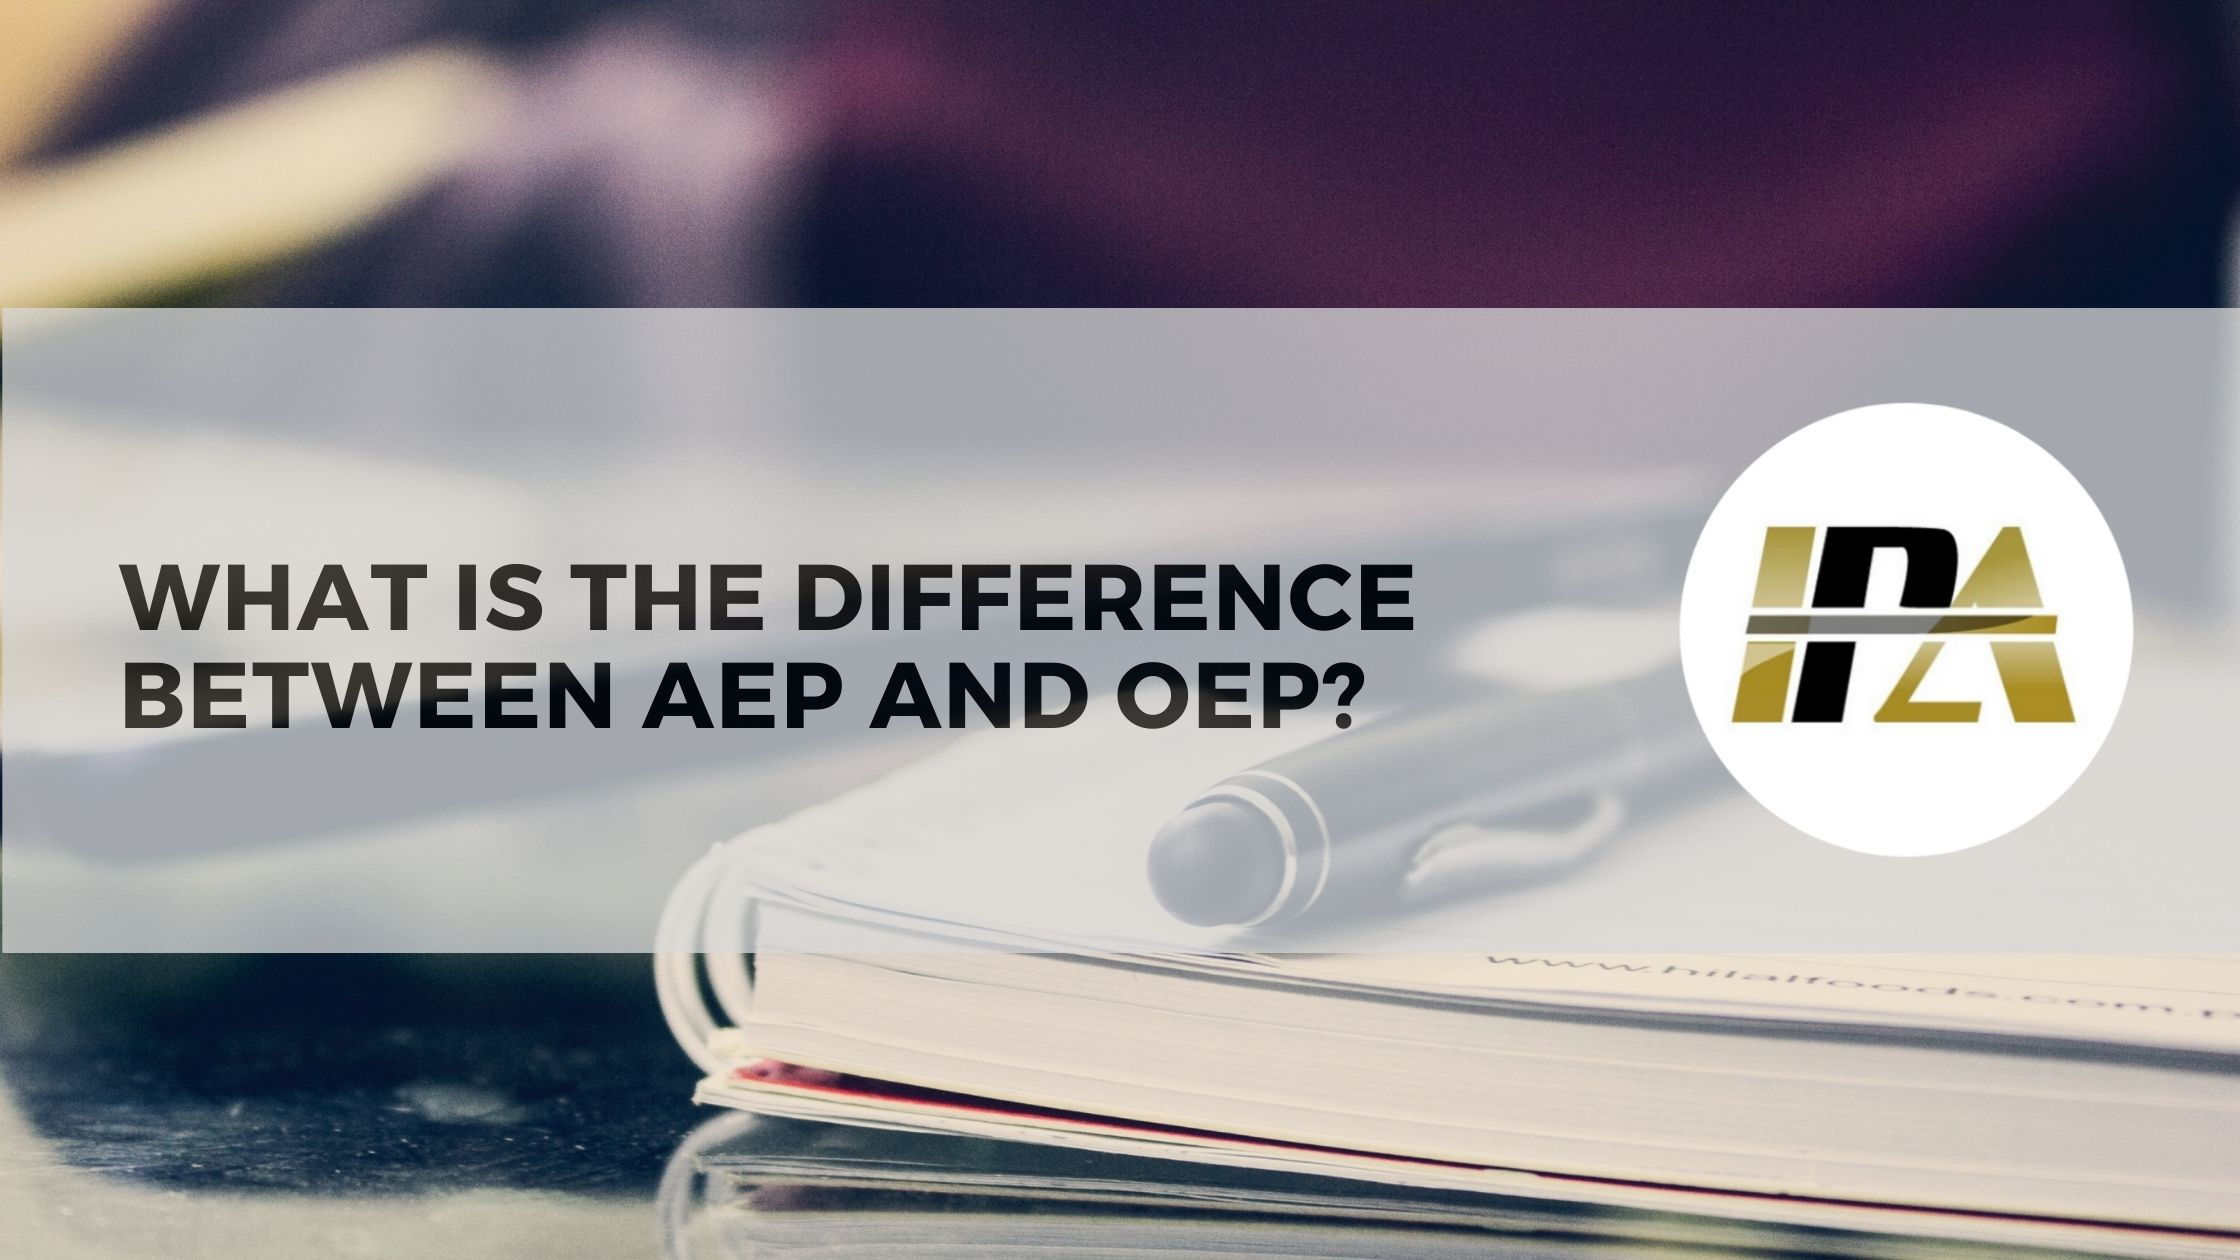 Difference Between AEP and OEP